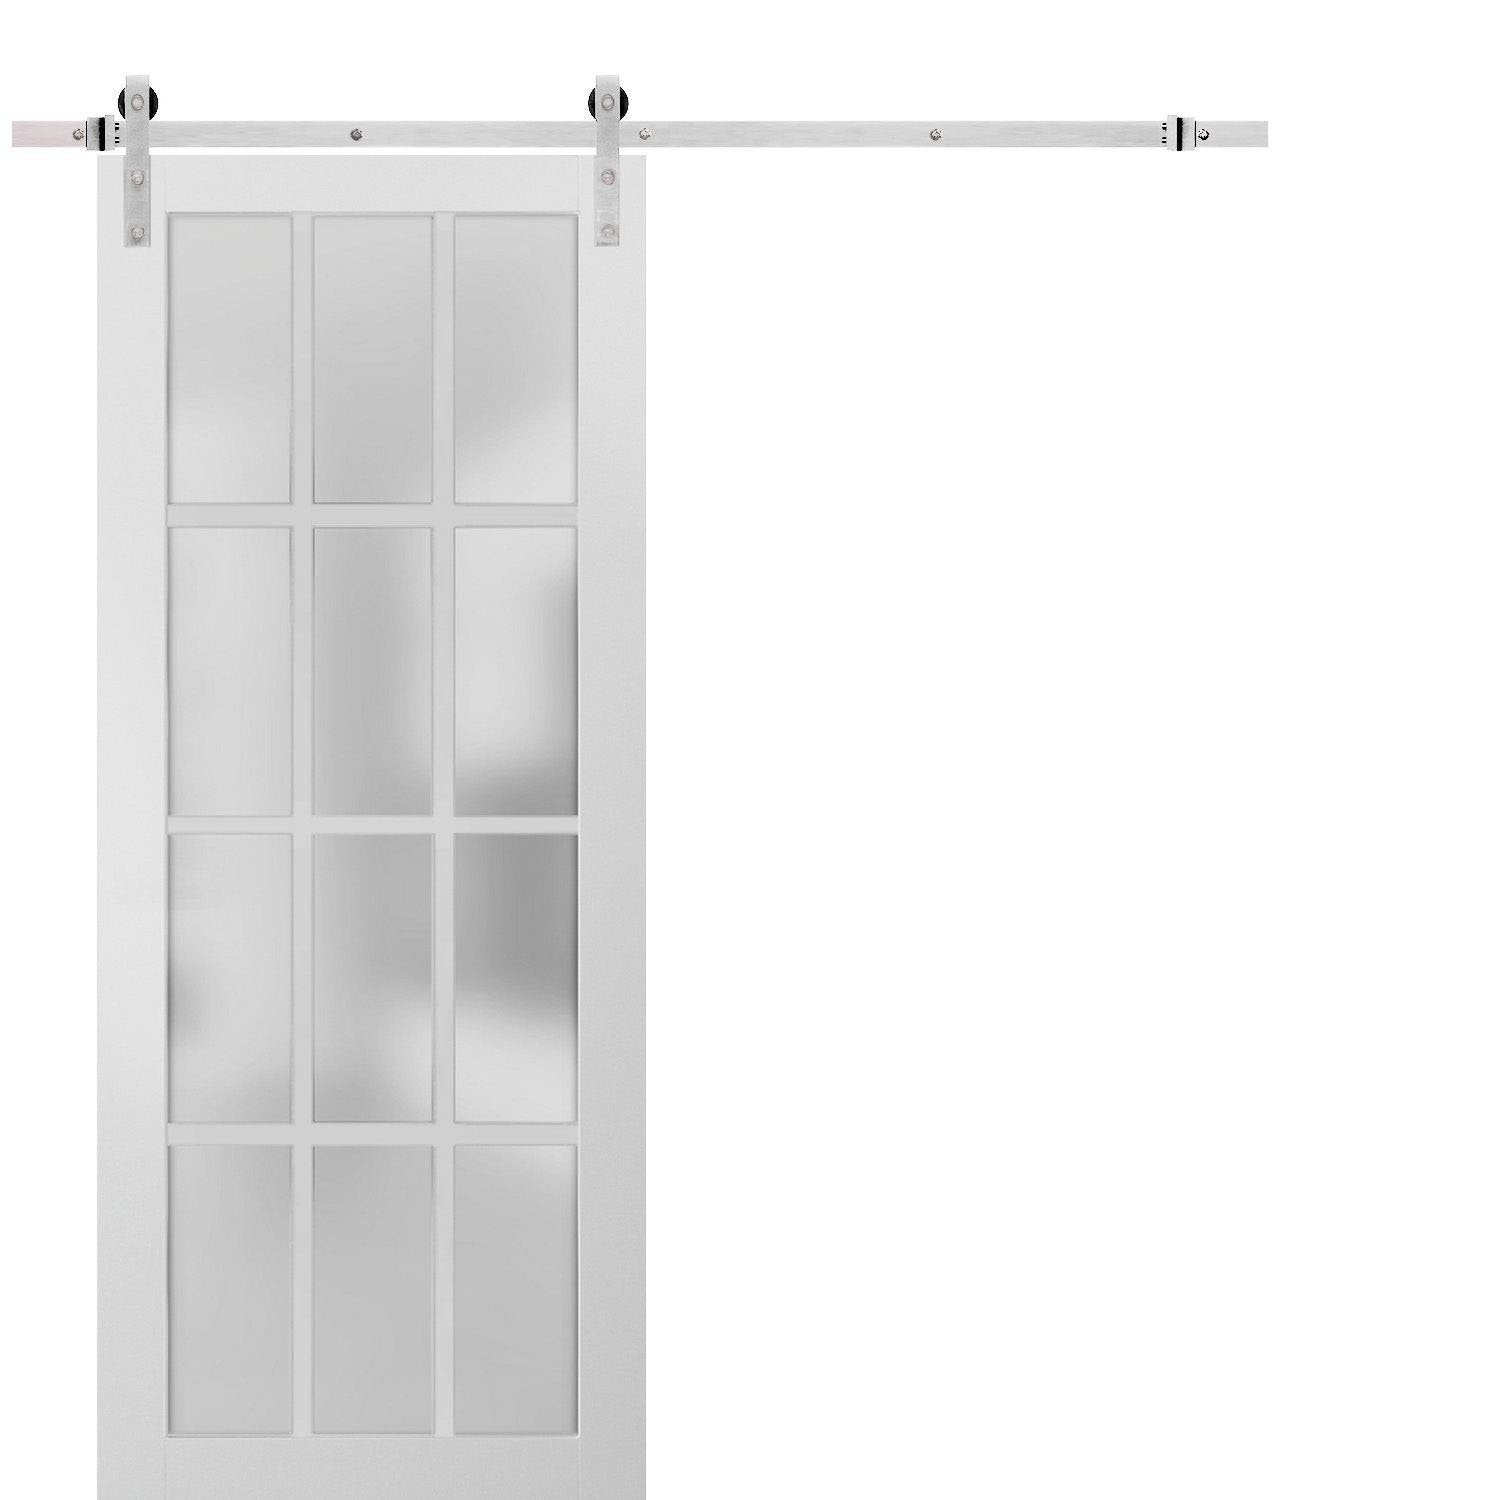 Felicia 3312 White Barn Door with 12 Lites Frosted Glass and Stainless Rail